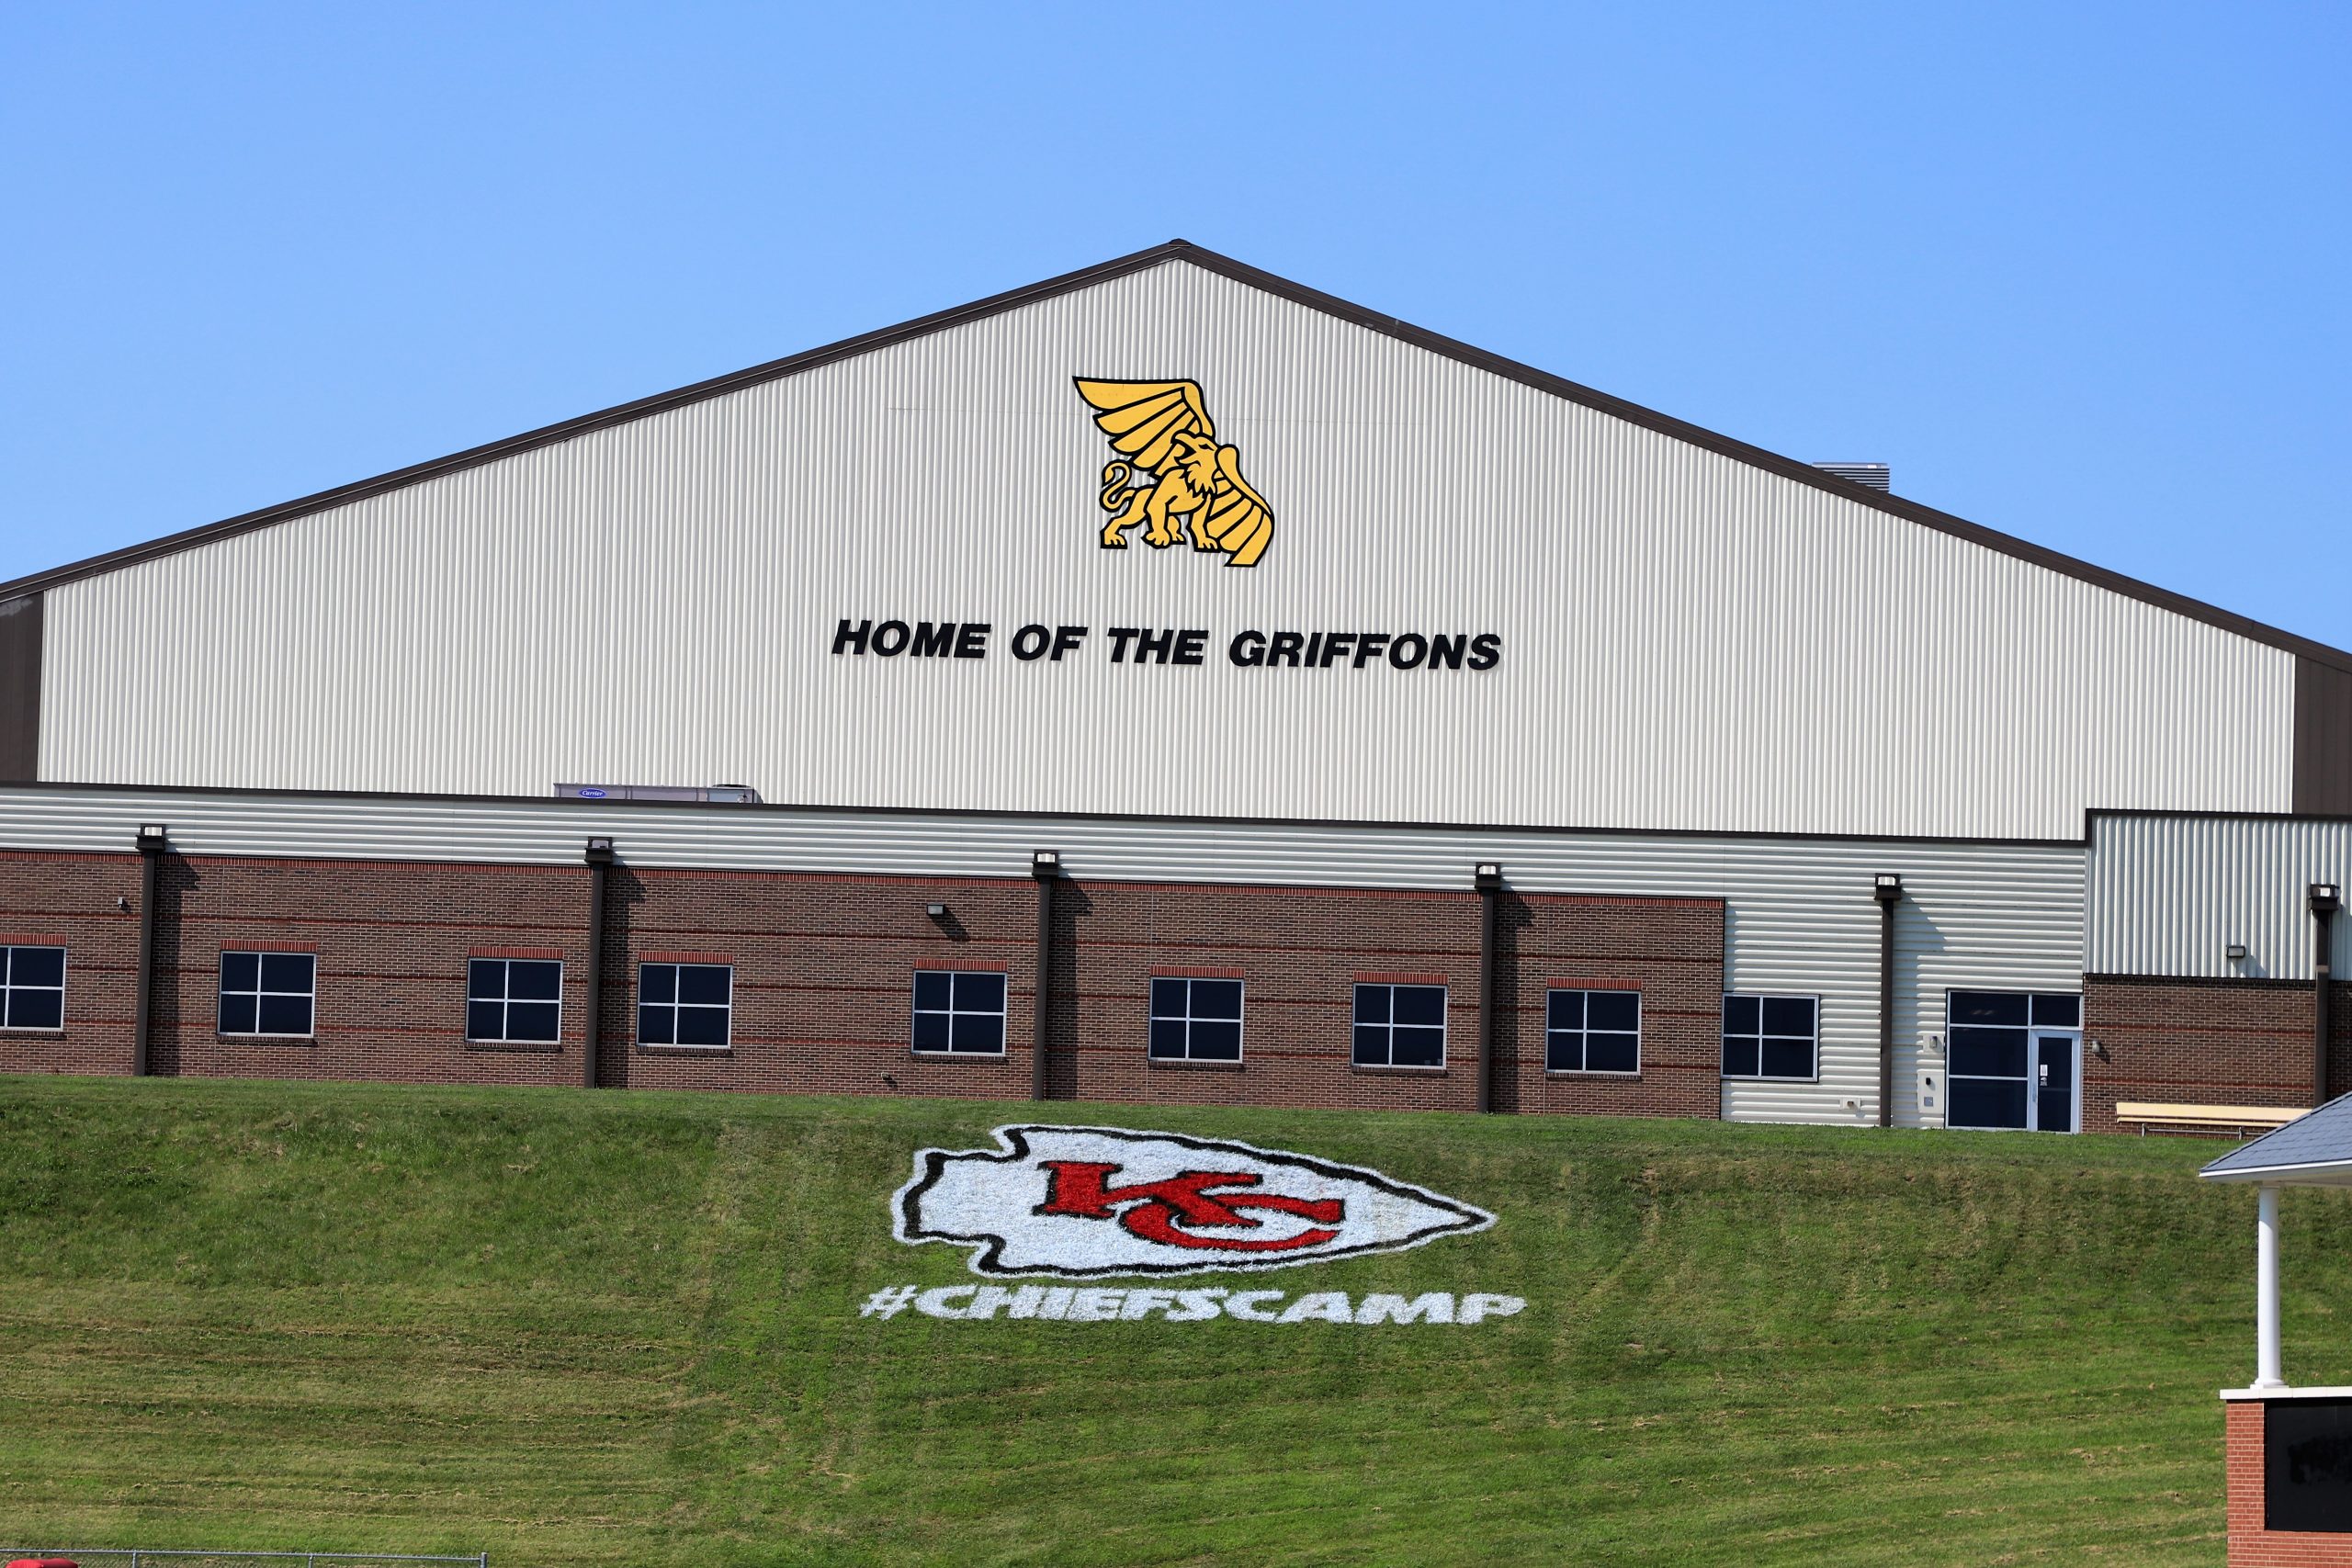 Home of the Griffons on side of building, Chiefs logo and #ChiefsCamp painted on hiillside in front of building